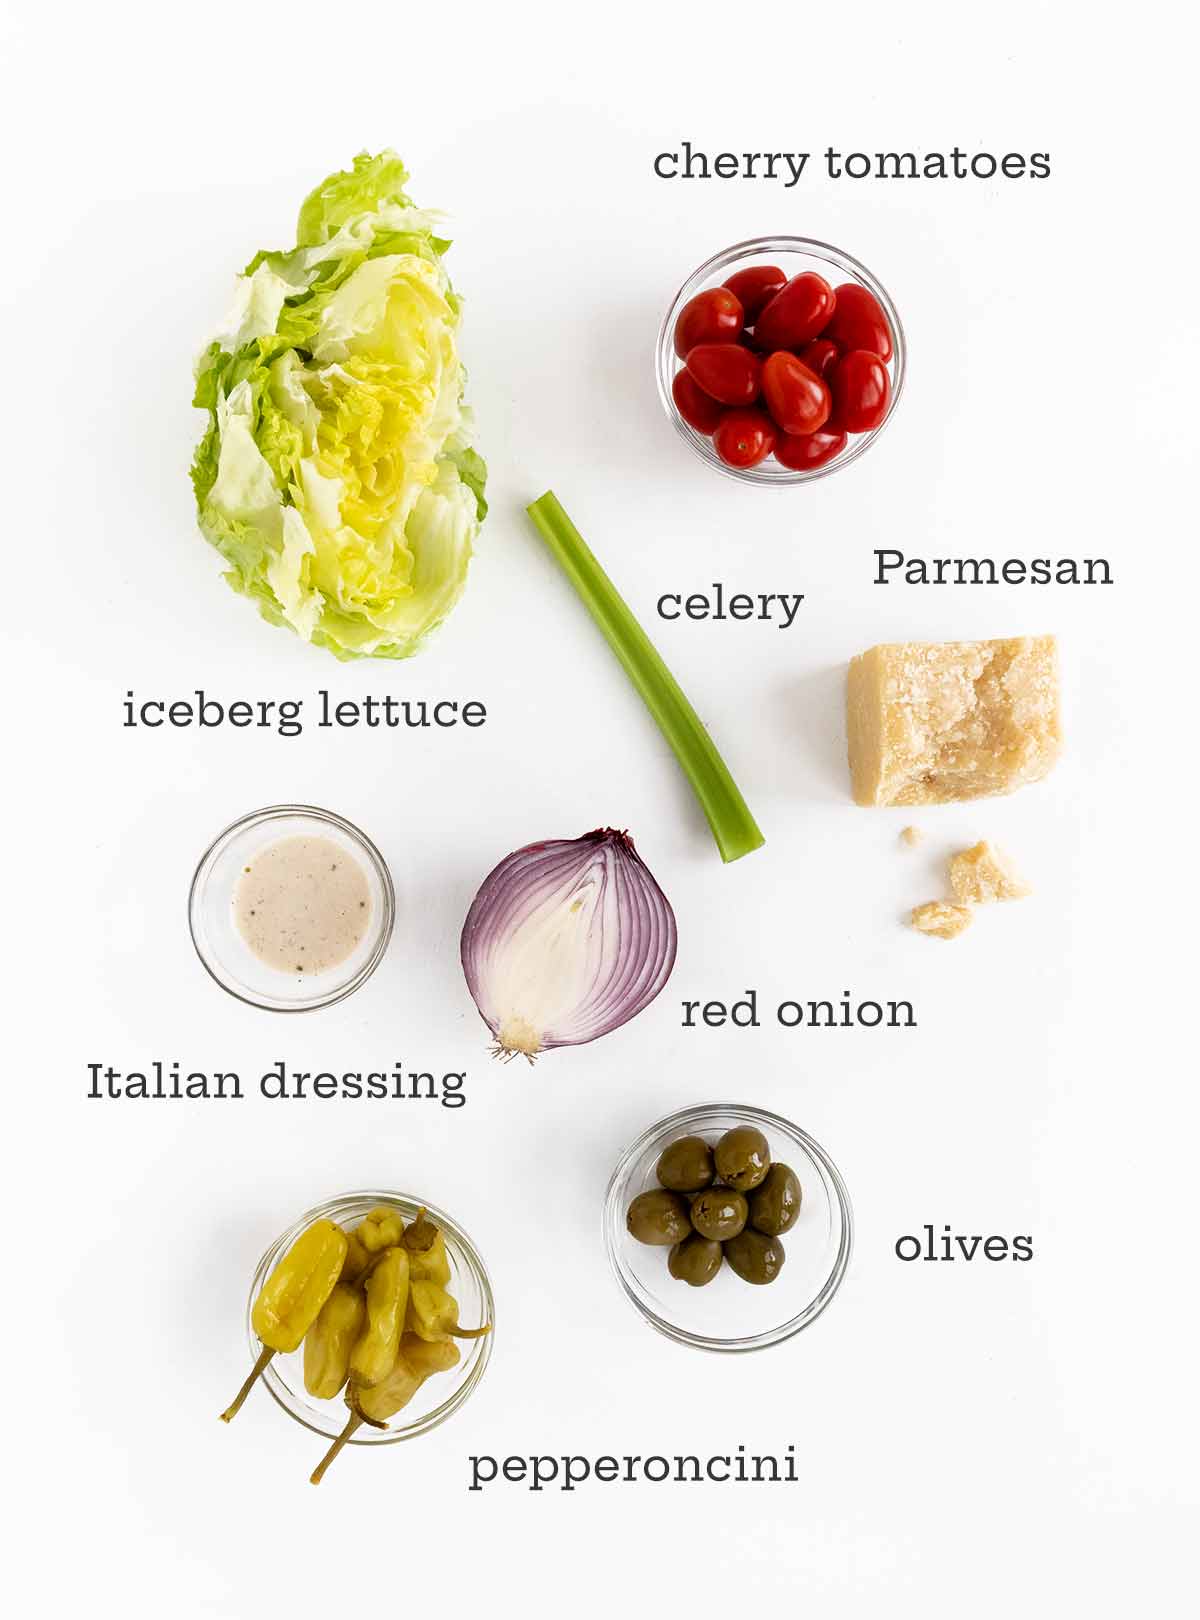 Ingredients for Italian salad -- lettuce, tomatoes, celery, Parmesan, dressing, onion, olives, and pepperoncini.